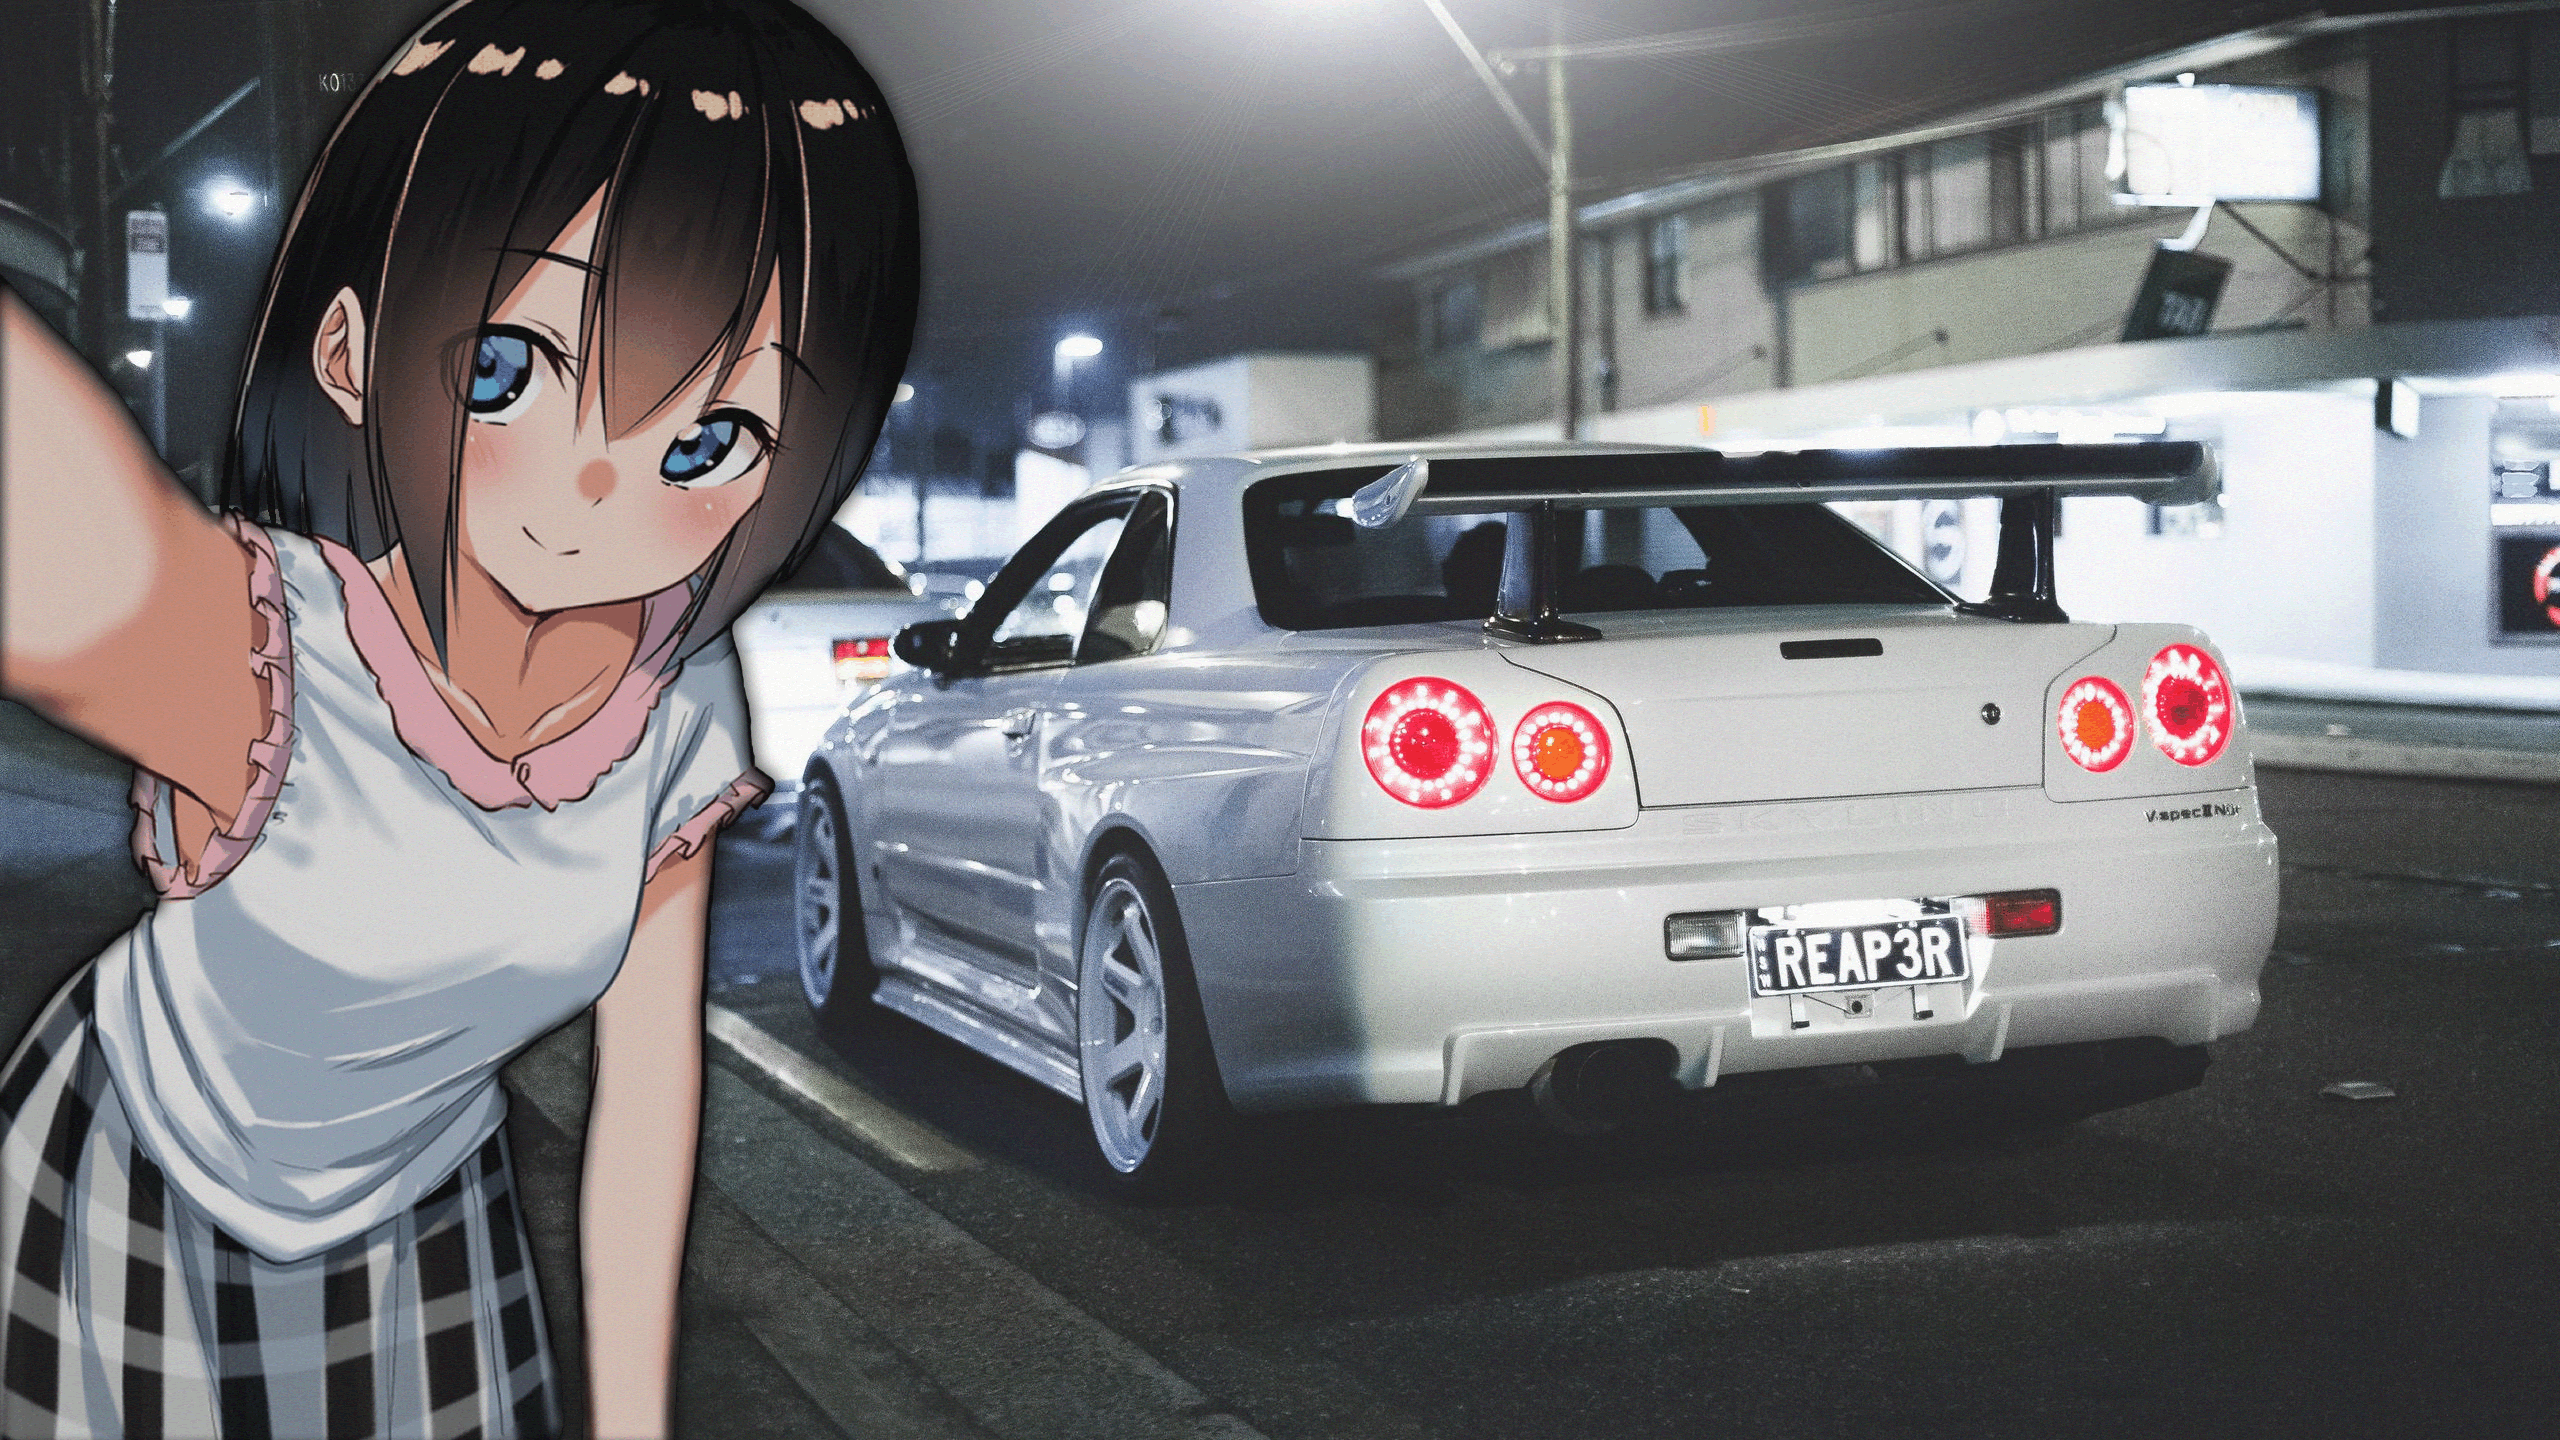 GTR R34 JDM Anime Girls Selfies Car Picture In Picture Vehicle Anime Blue Eyes Brunette White Cars S 2560x1440